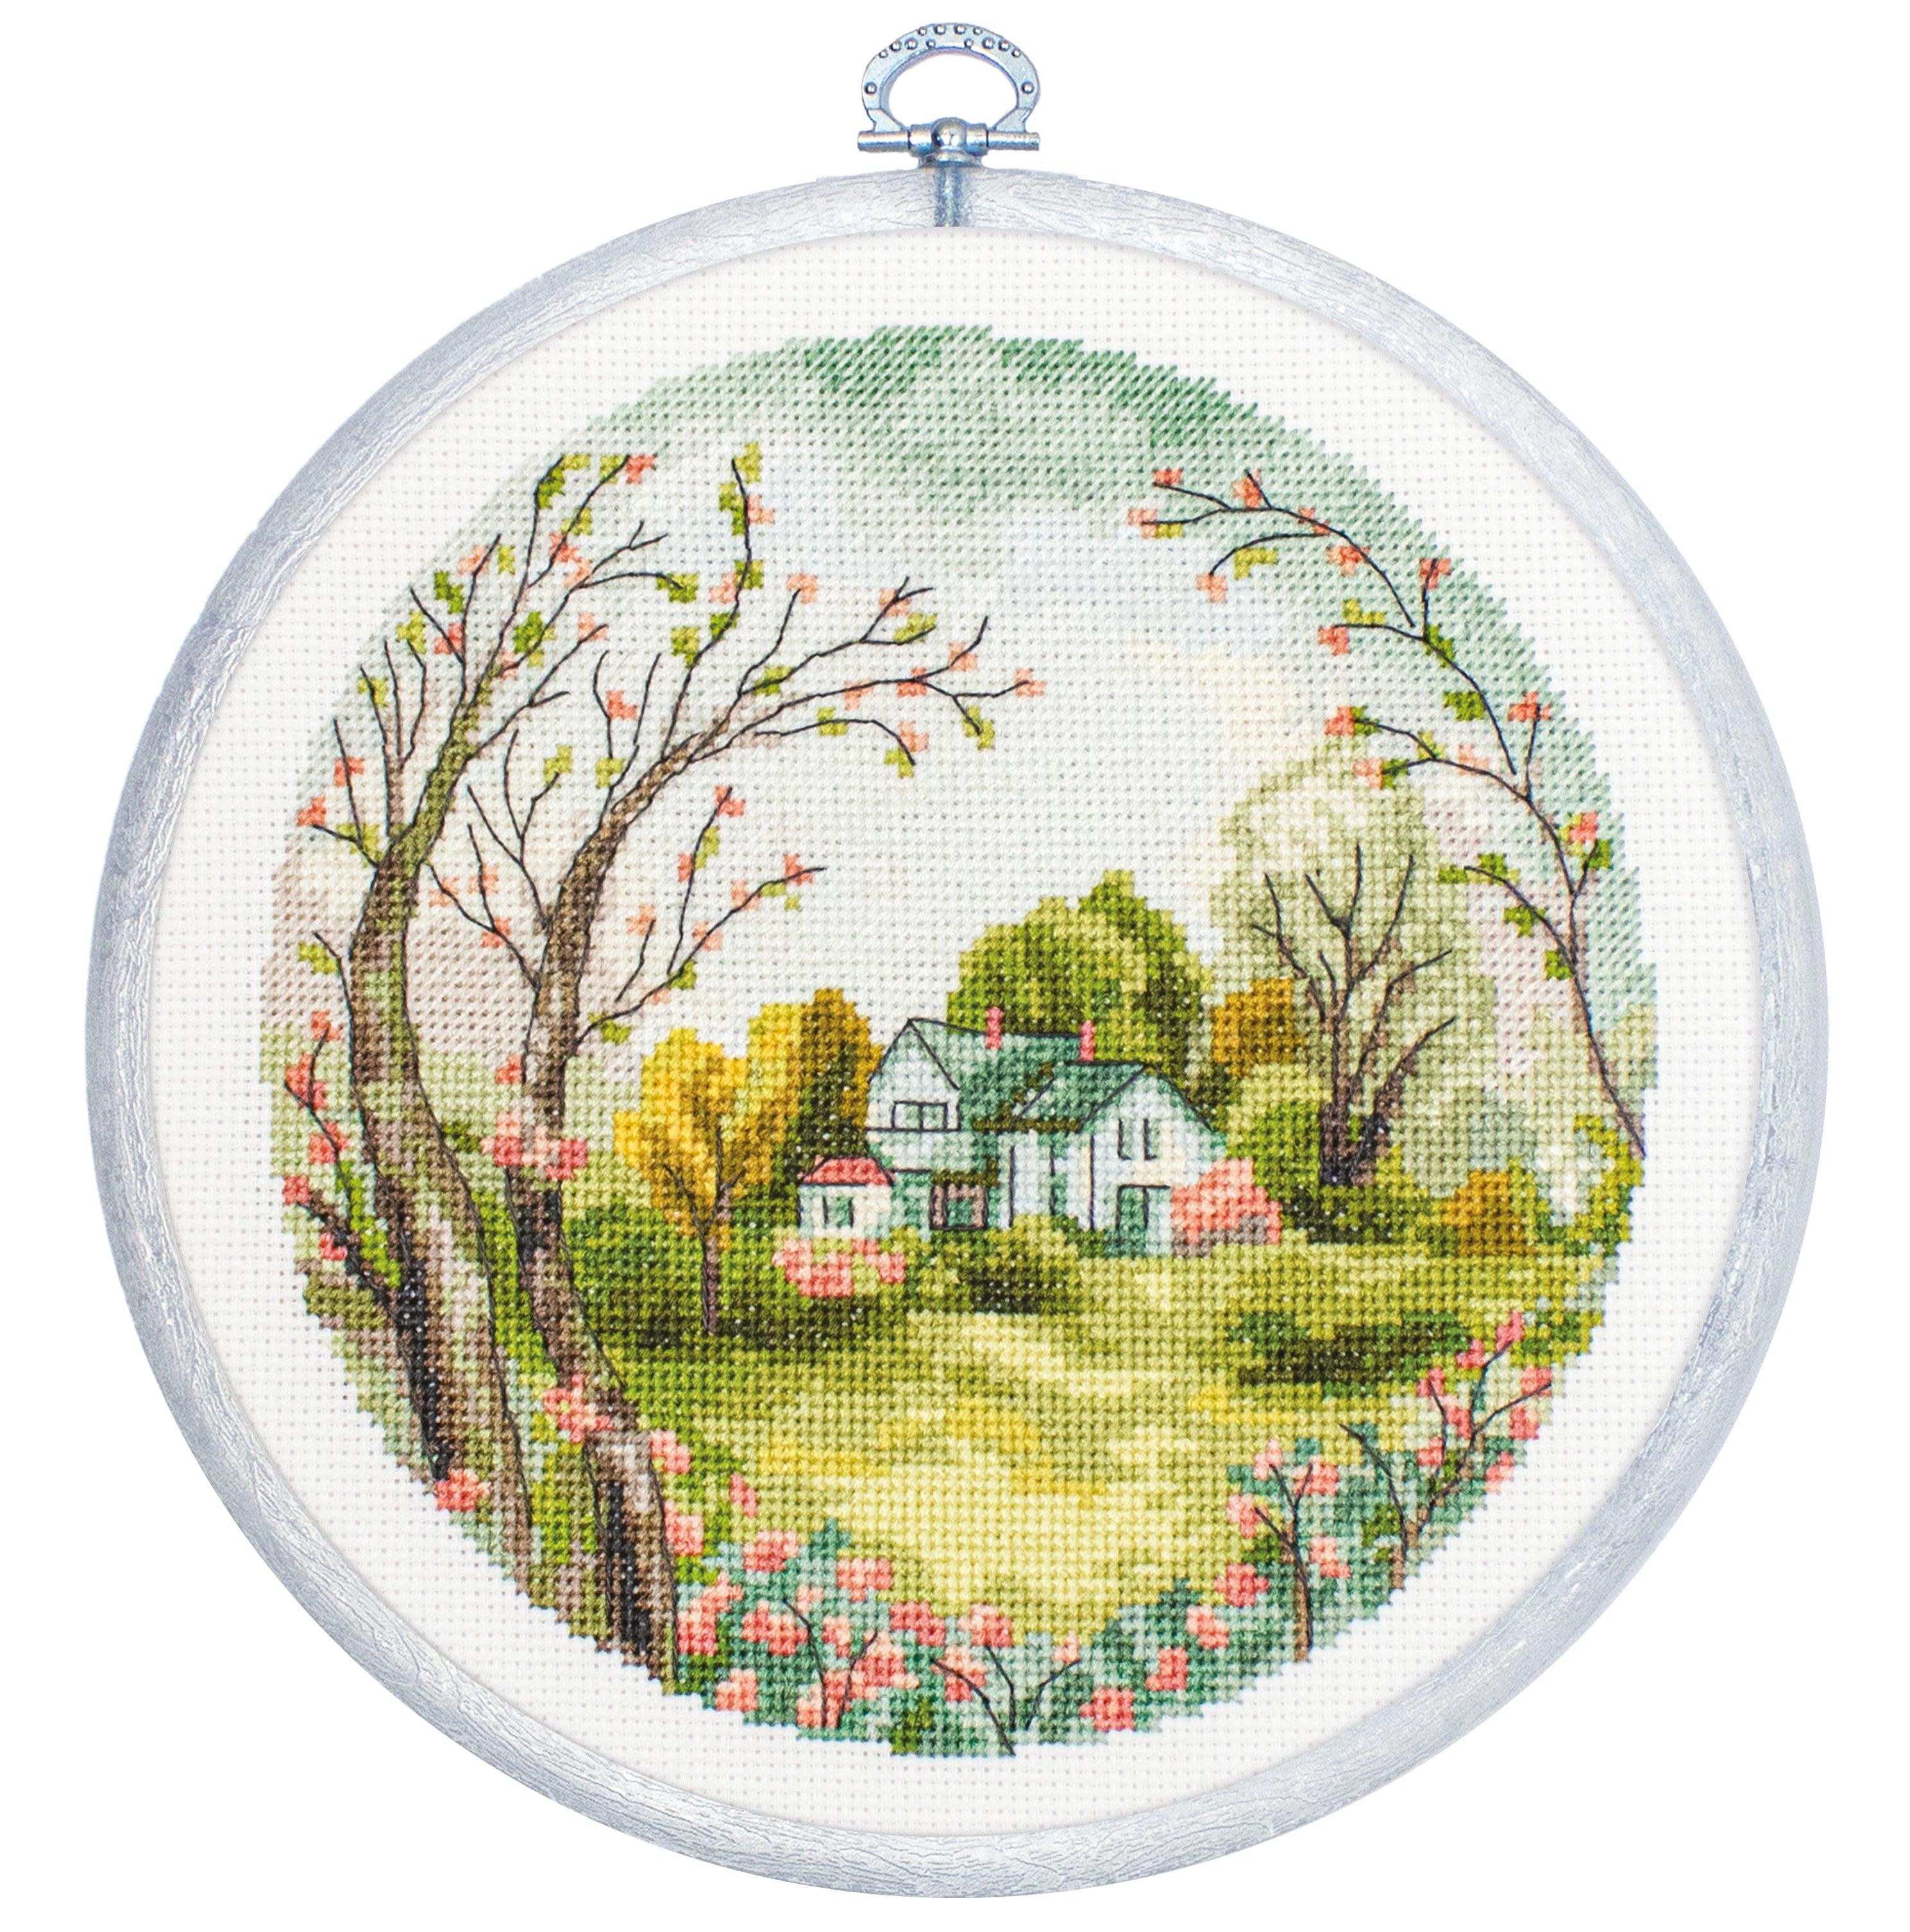 Cross Stitch Kit with Hoop Included Luca-S - The Spring, BC219 - Luca-S Cross Stitch Kits